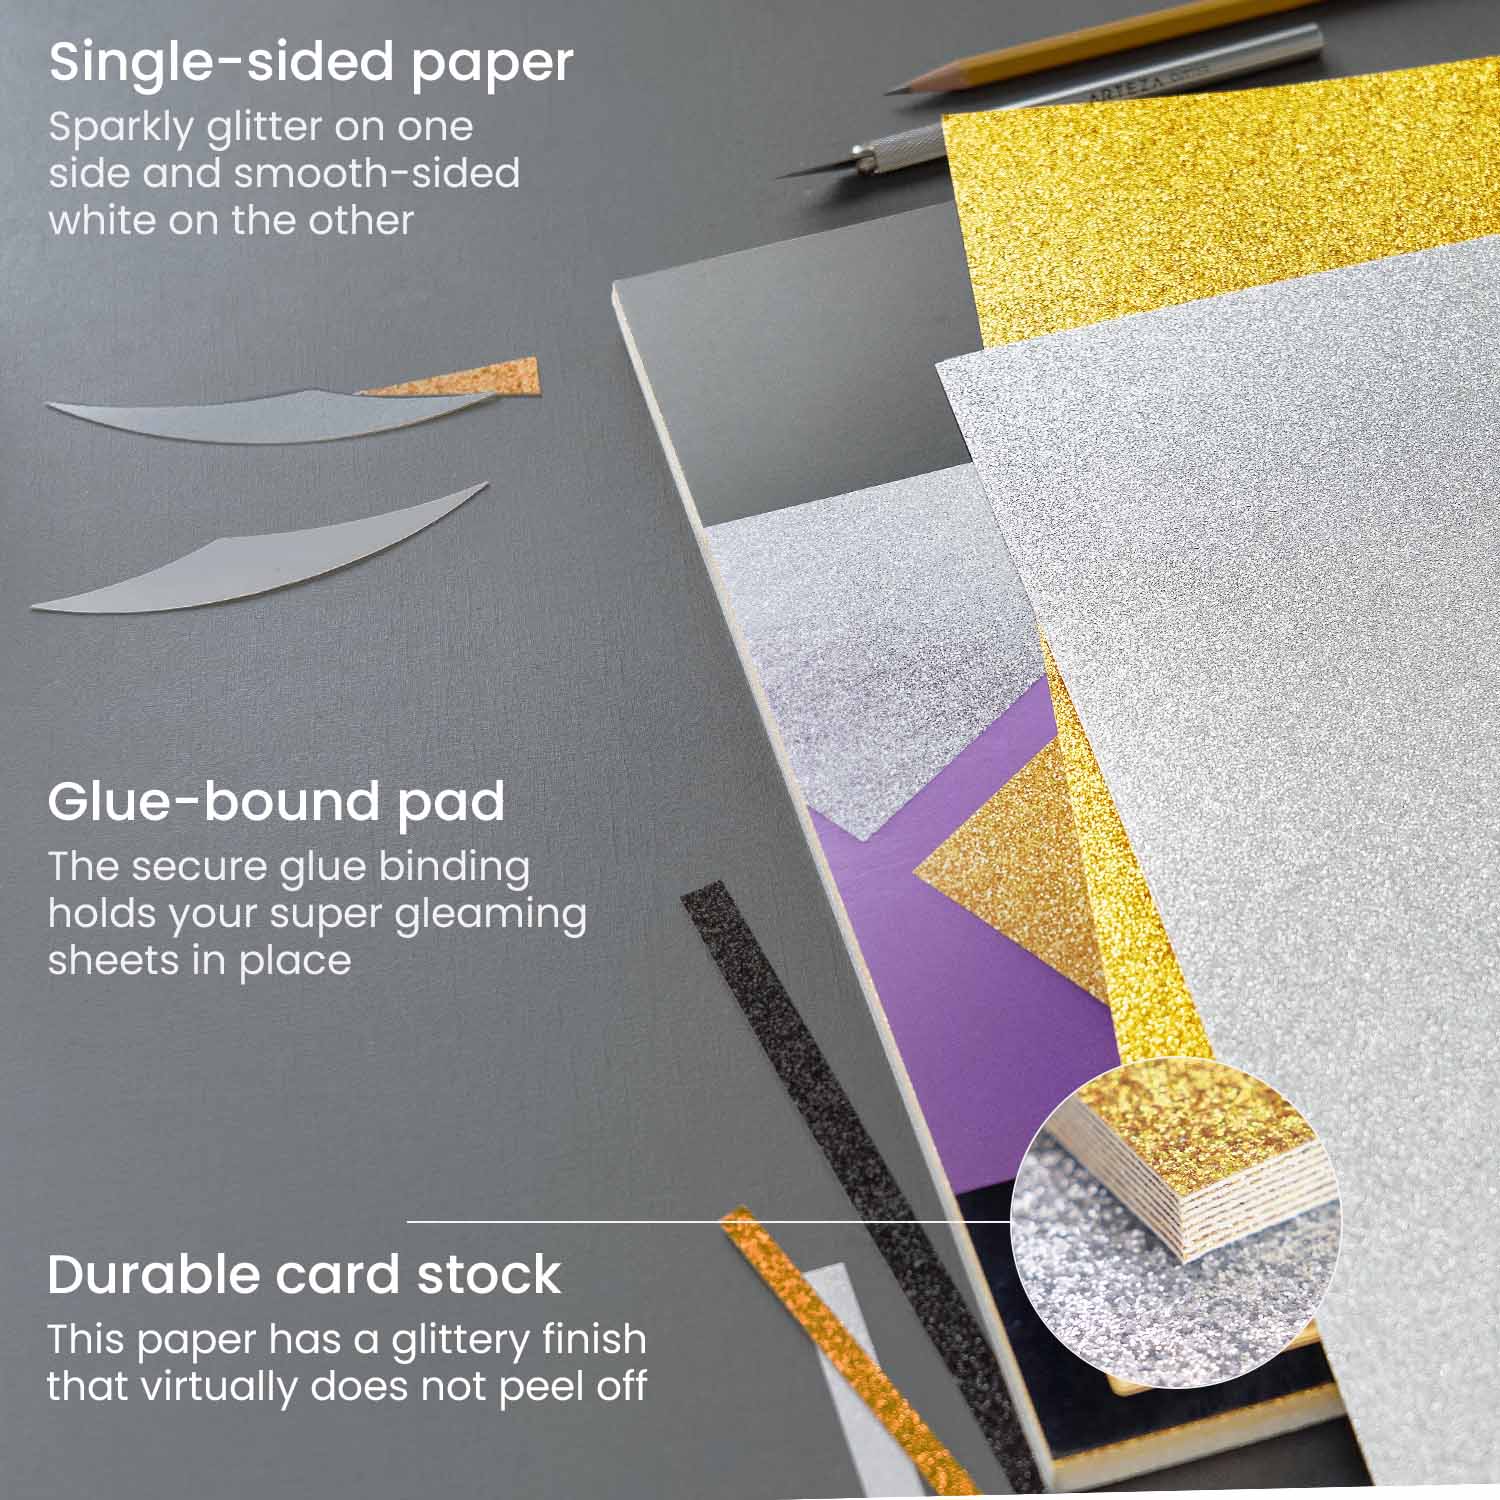 Information on Arteza Gold and Silver Glitter Paper